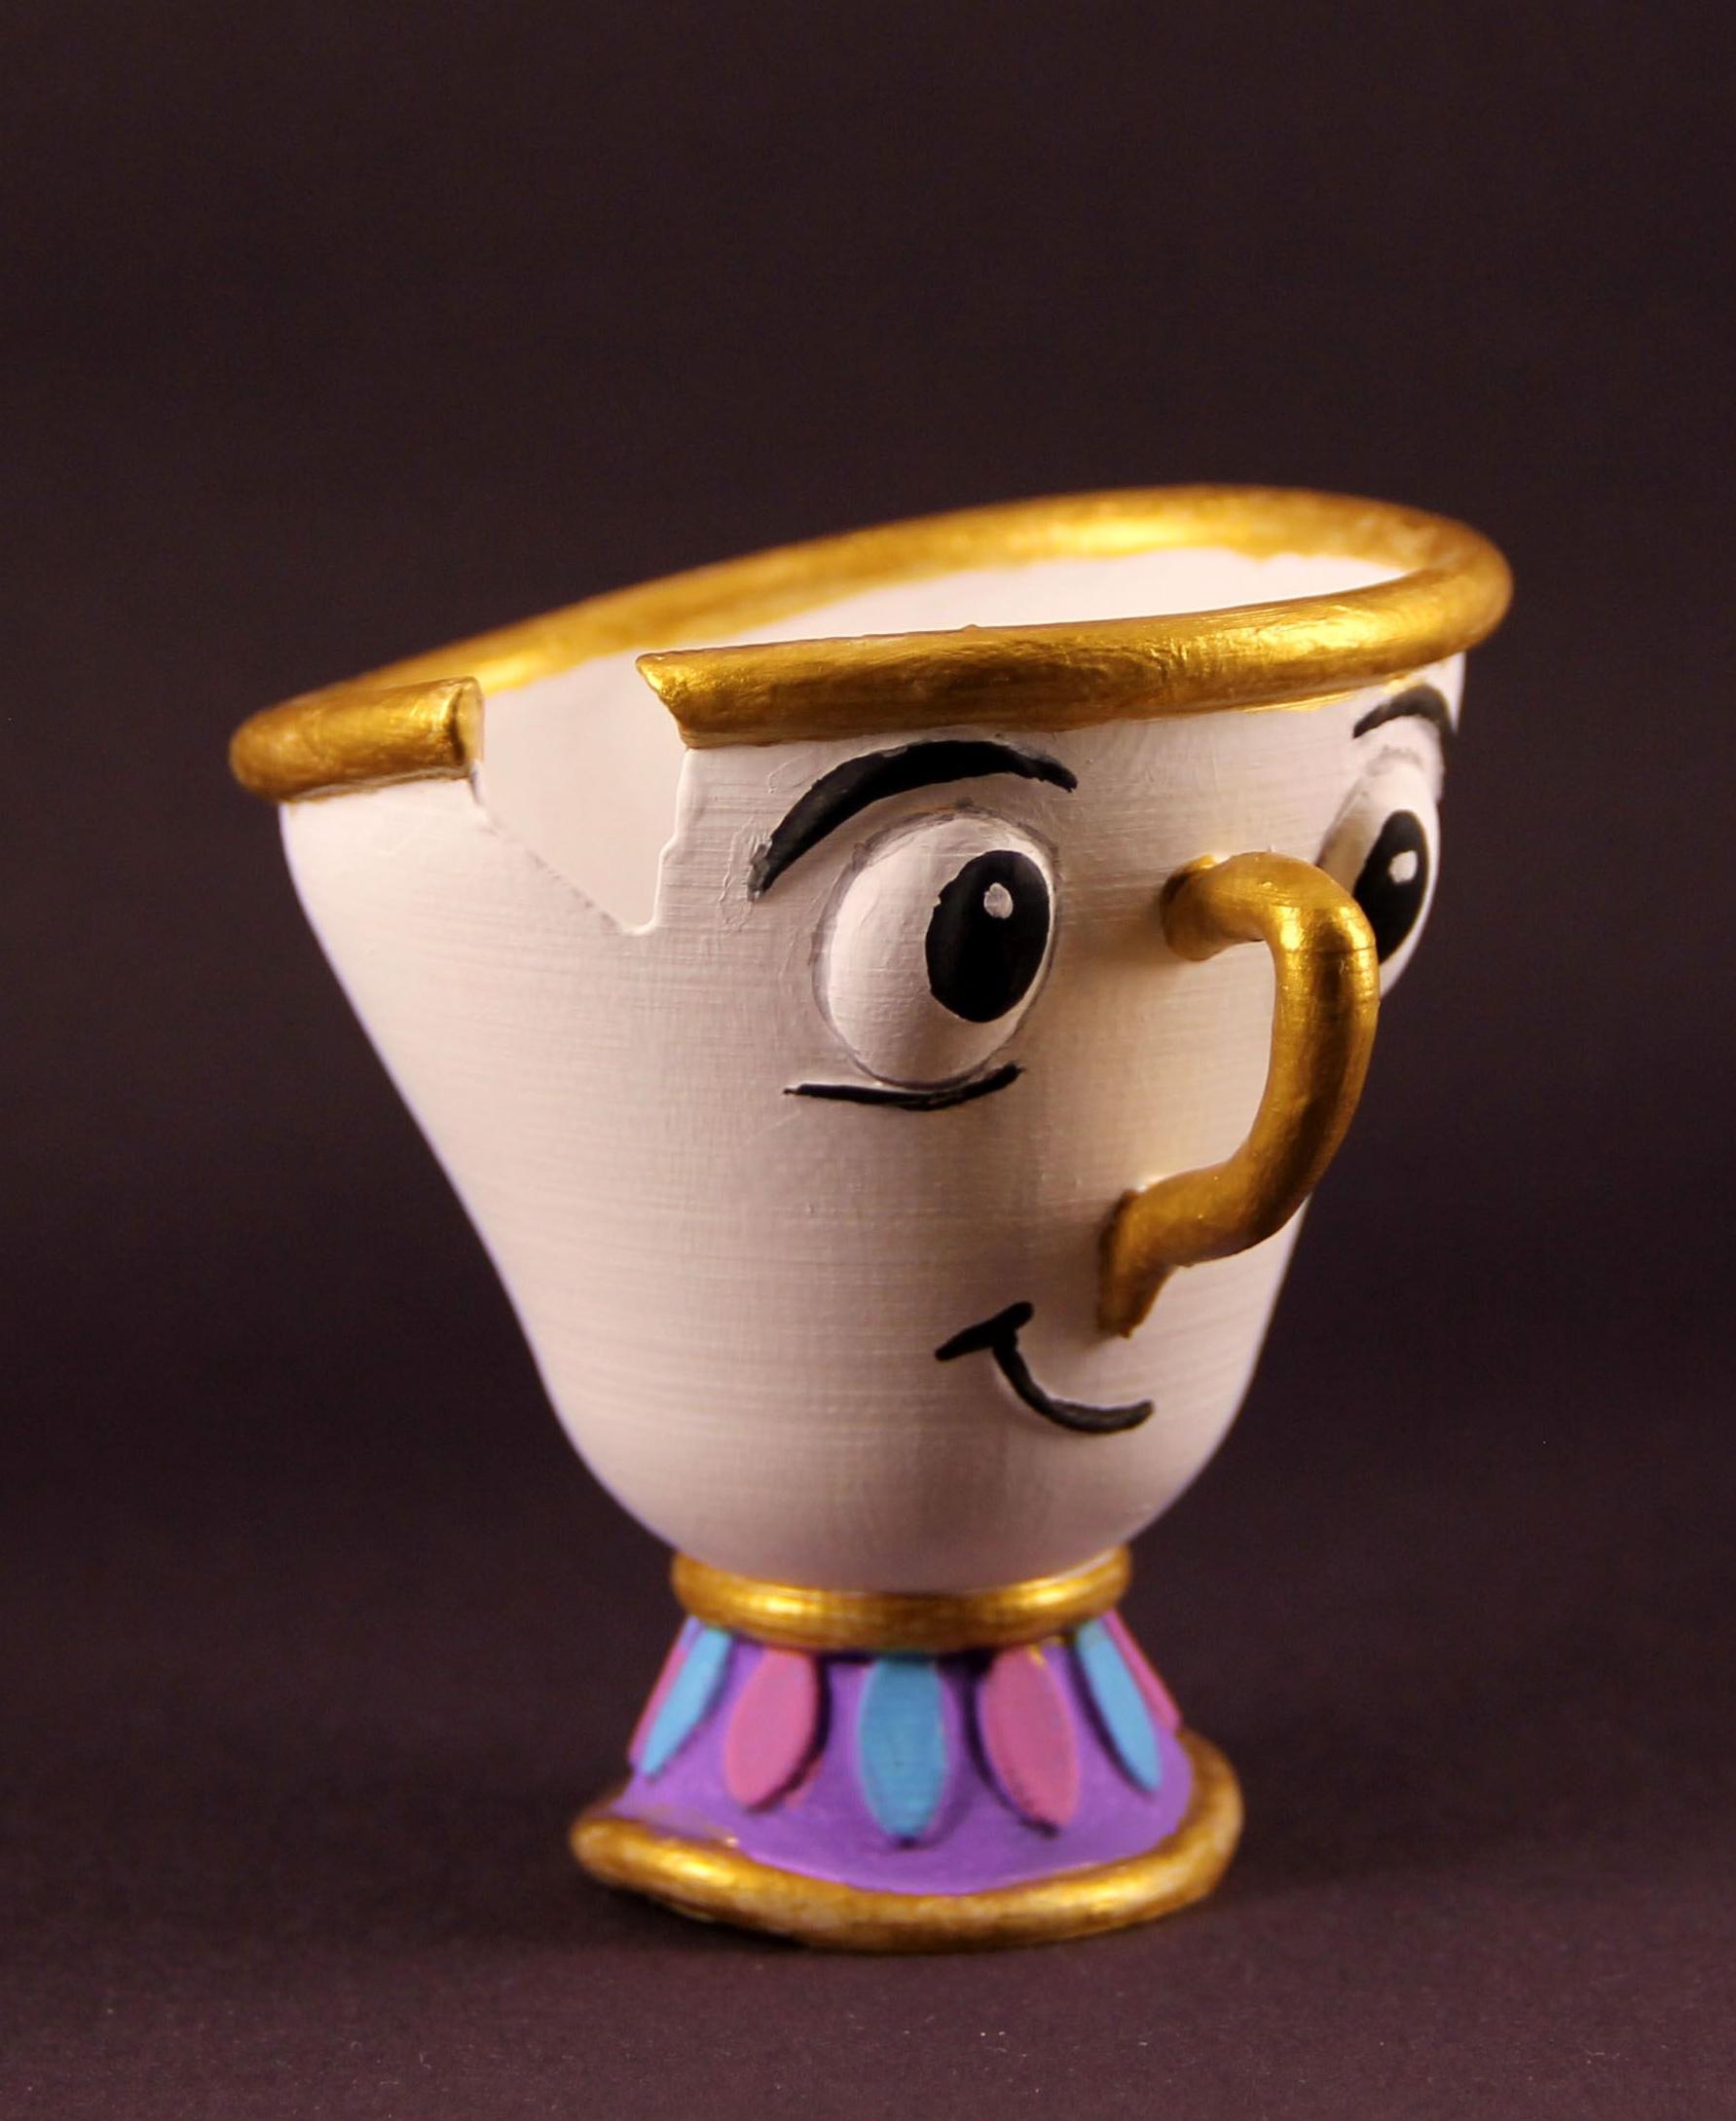 Chip from beauty and the beast  - Had lots of fun painting this cute model - 3d model